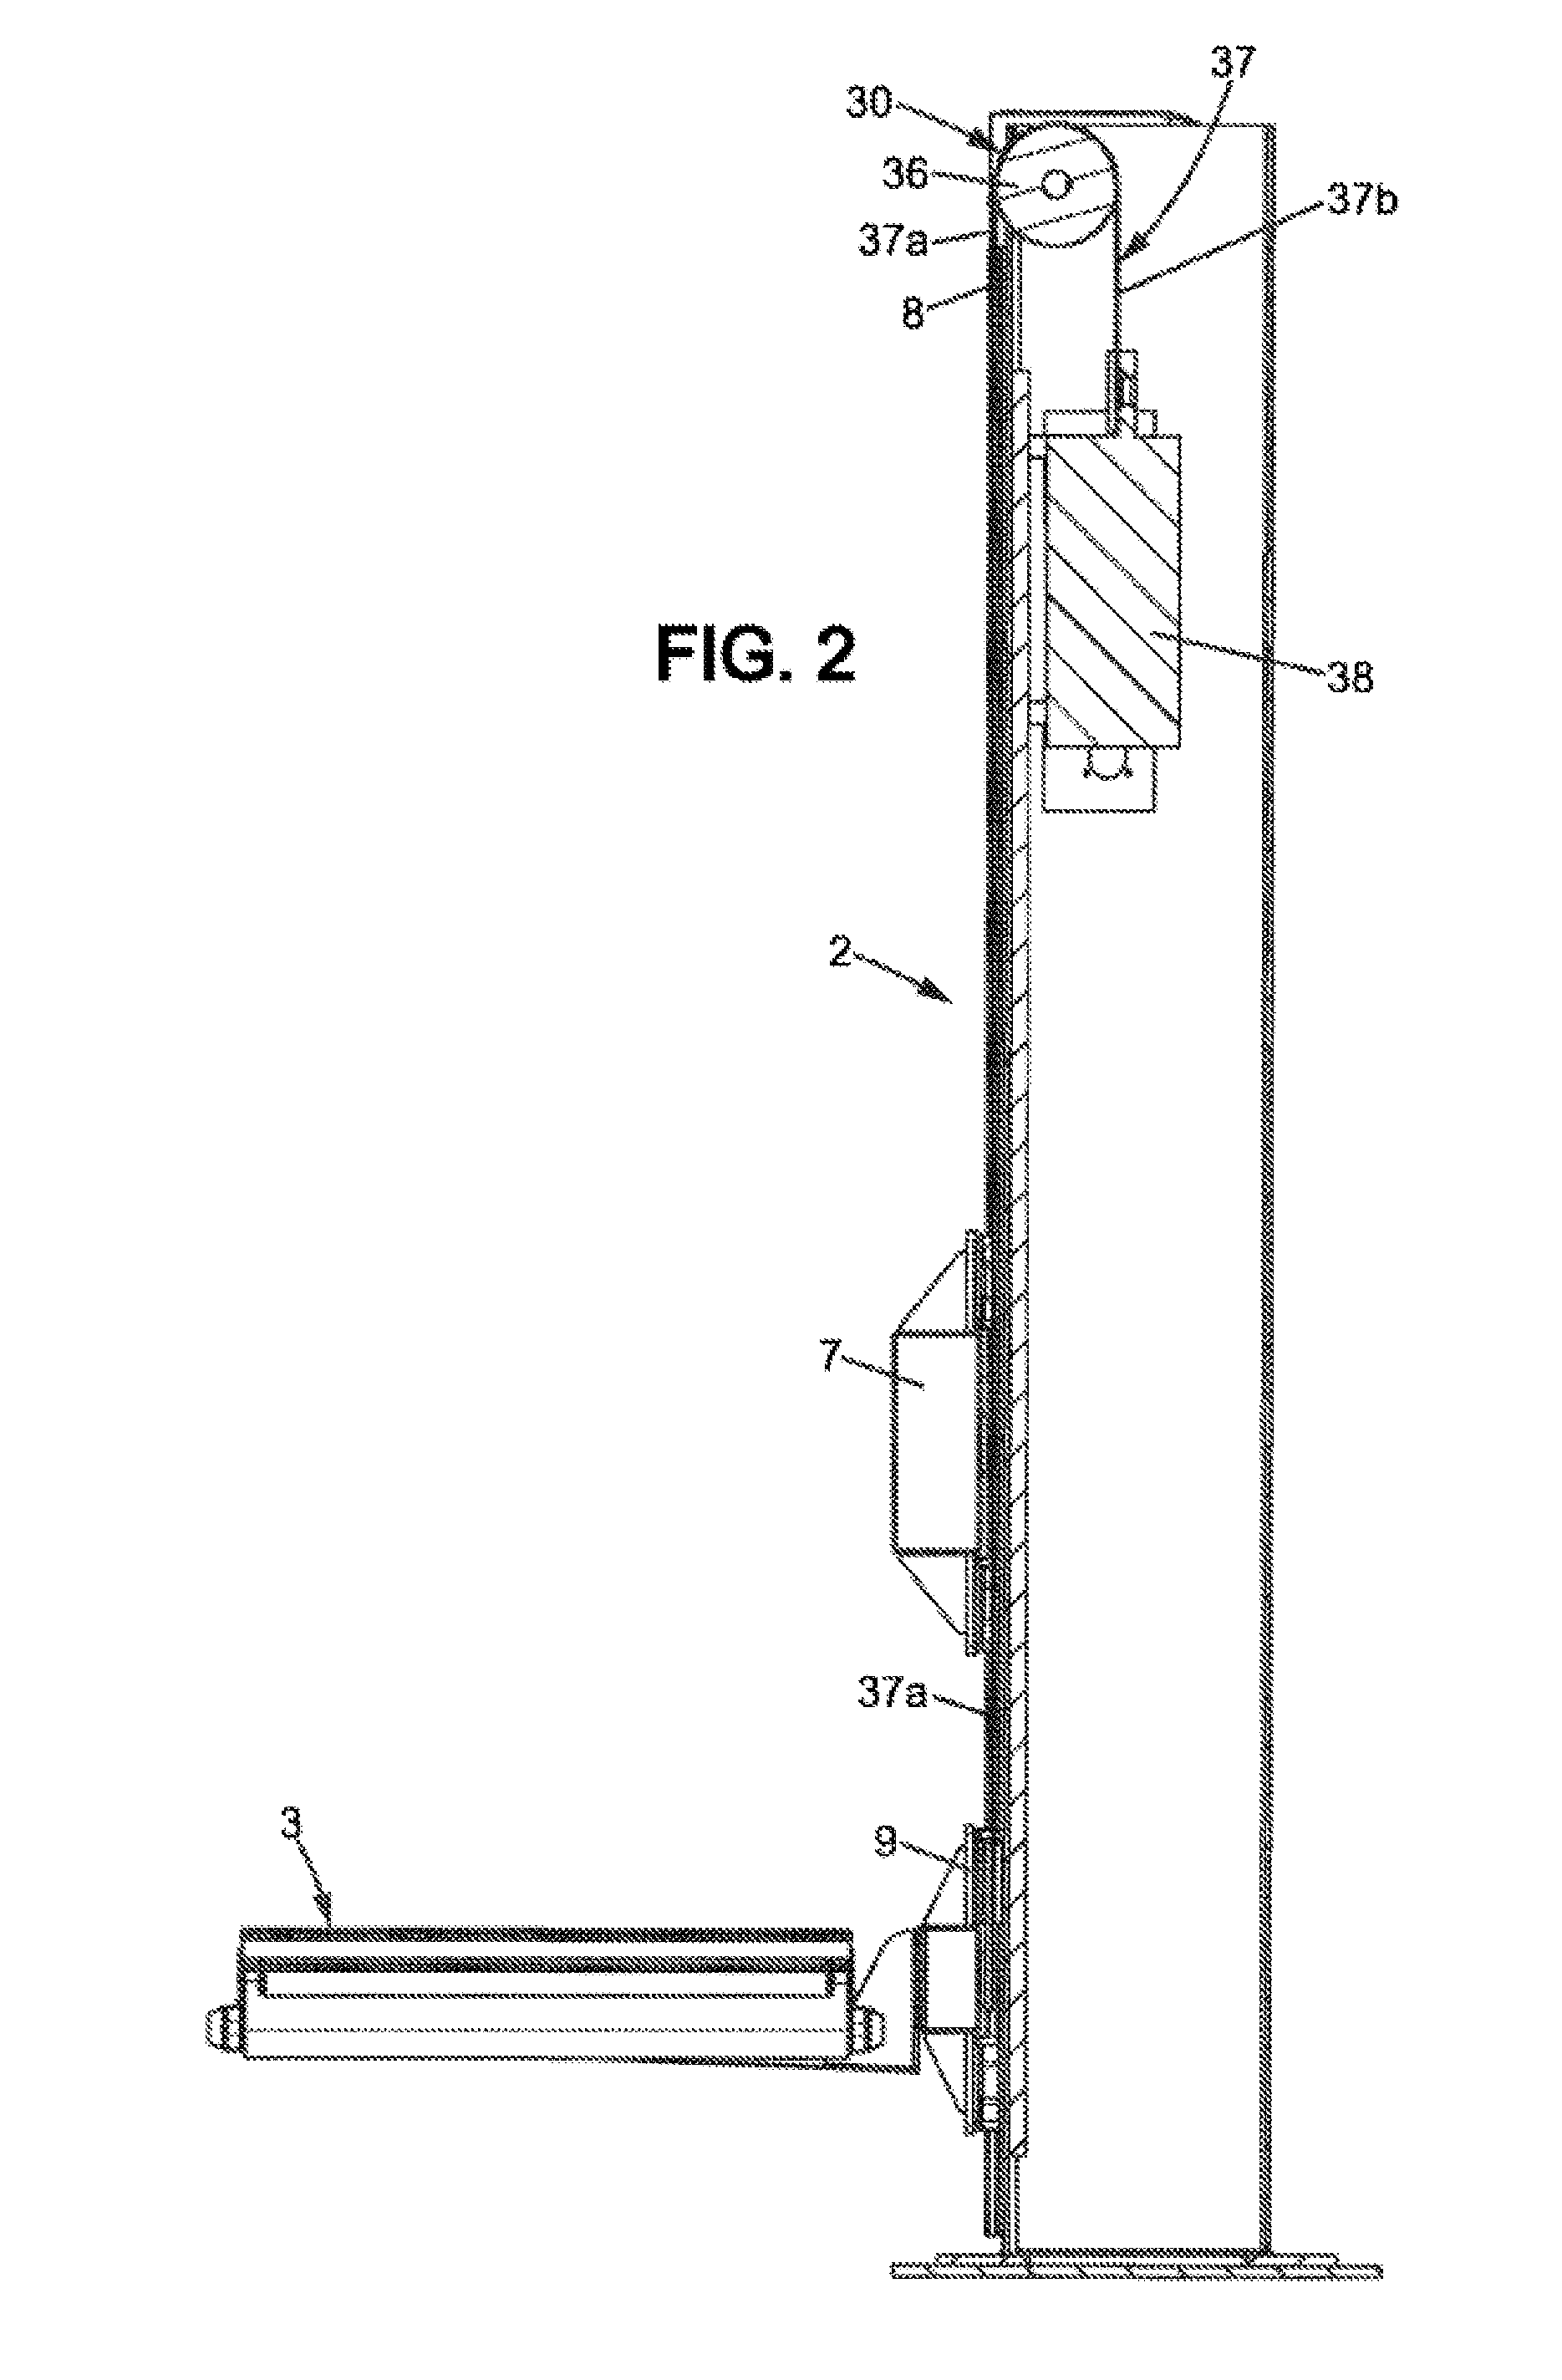 Device for transferring pre-formed layers of objects to the top of a pallet